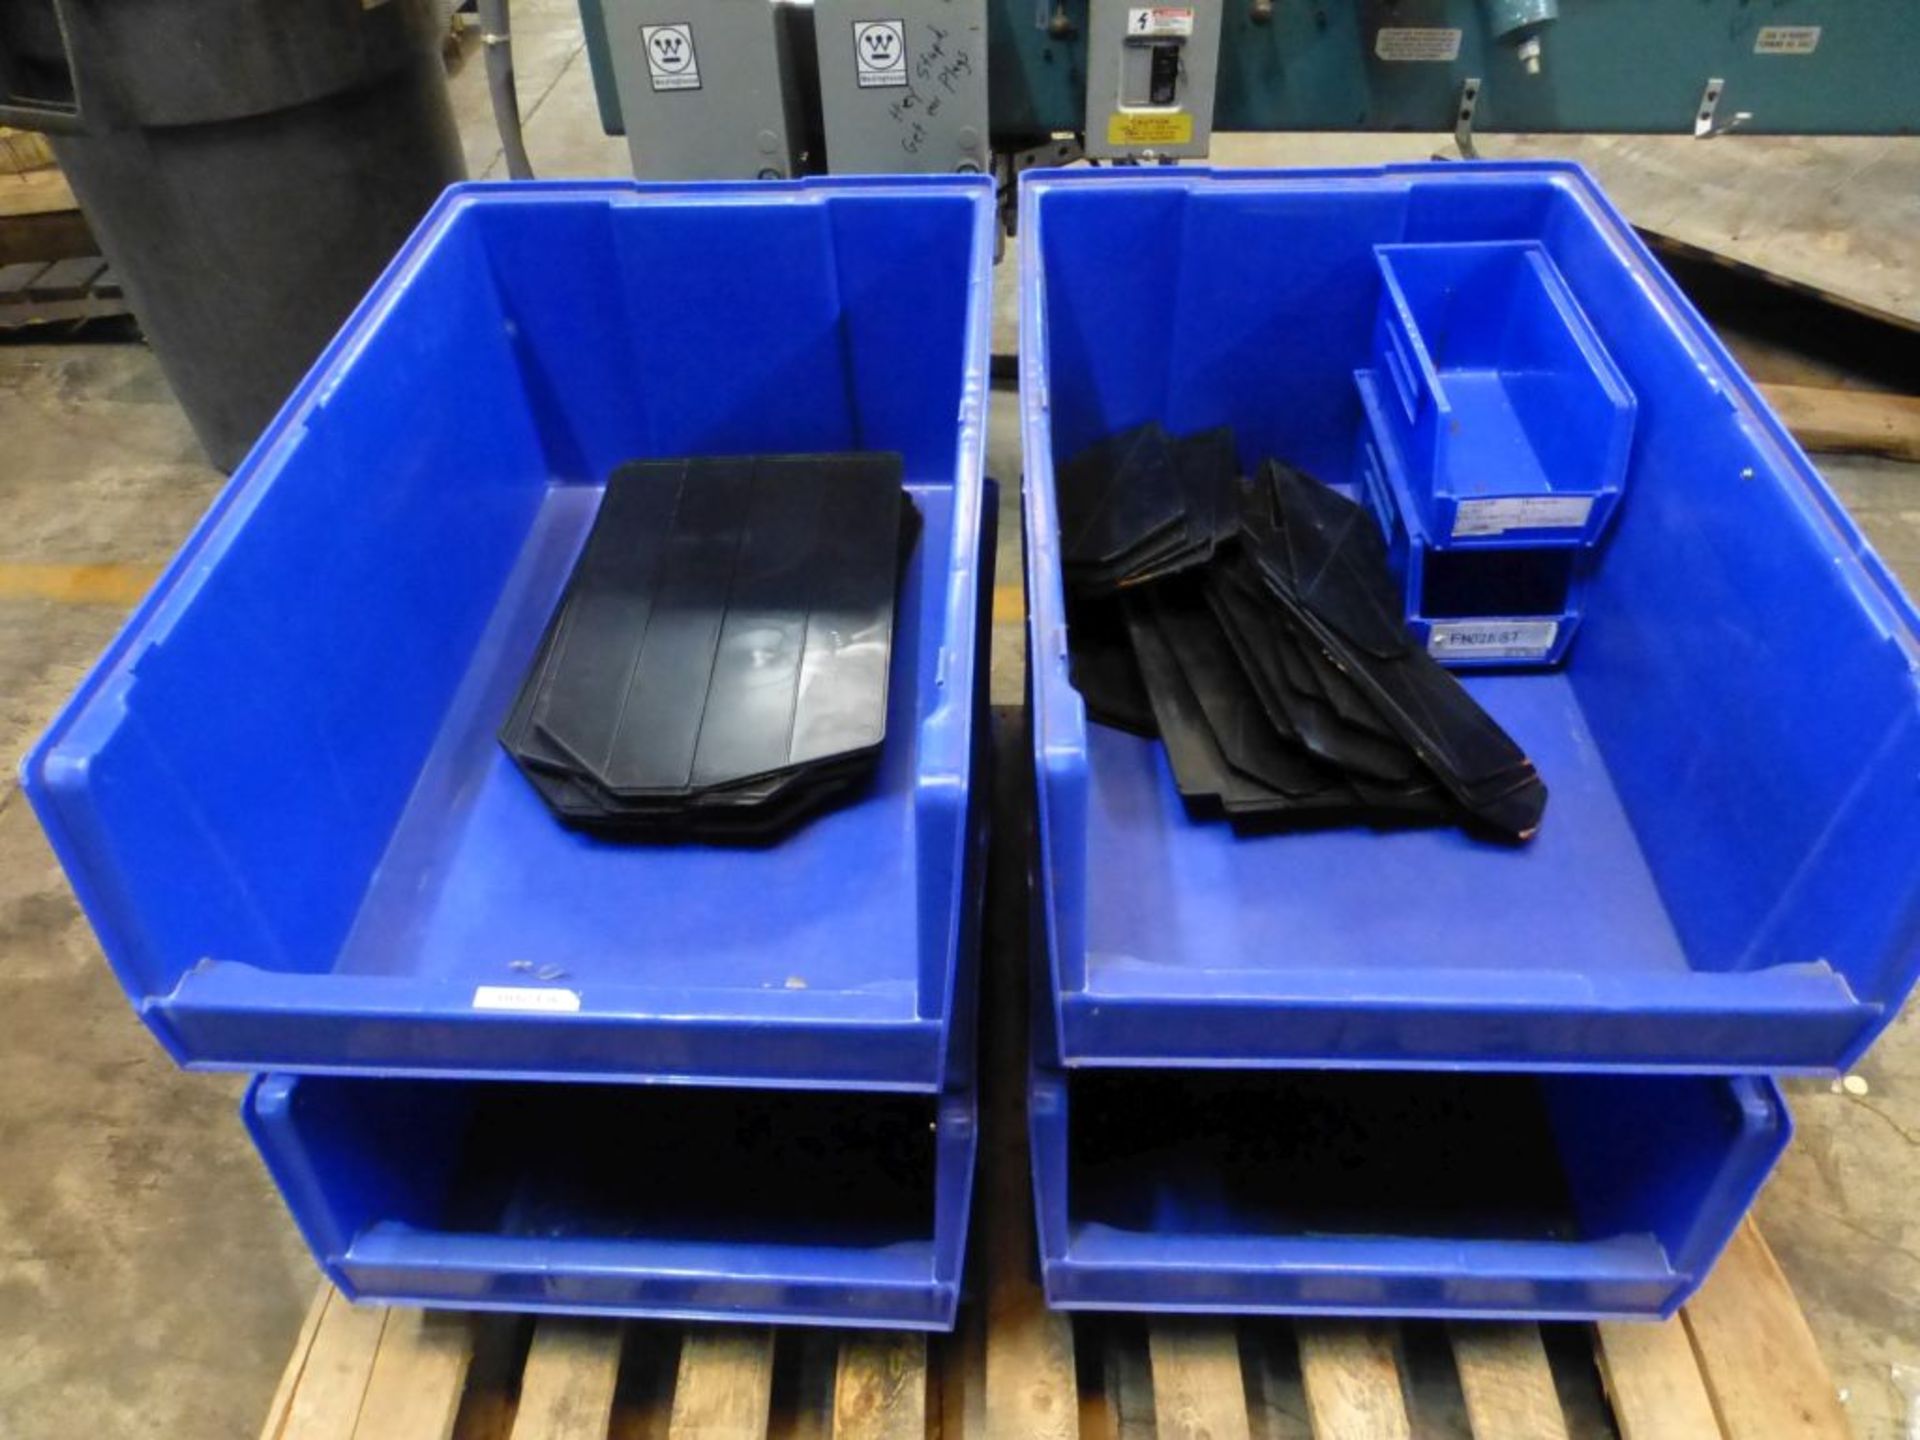 Lot of (6) Assorted Akro Bins Plastic Stackable Storage Bins - (4) Blue Part No. 74-291, 11"W x 18"L - Image 4 of 4